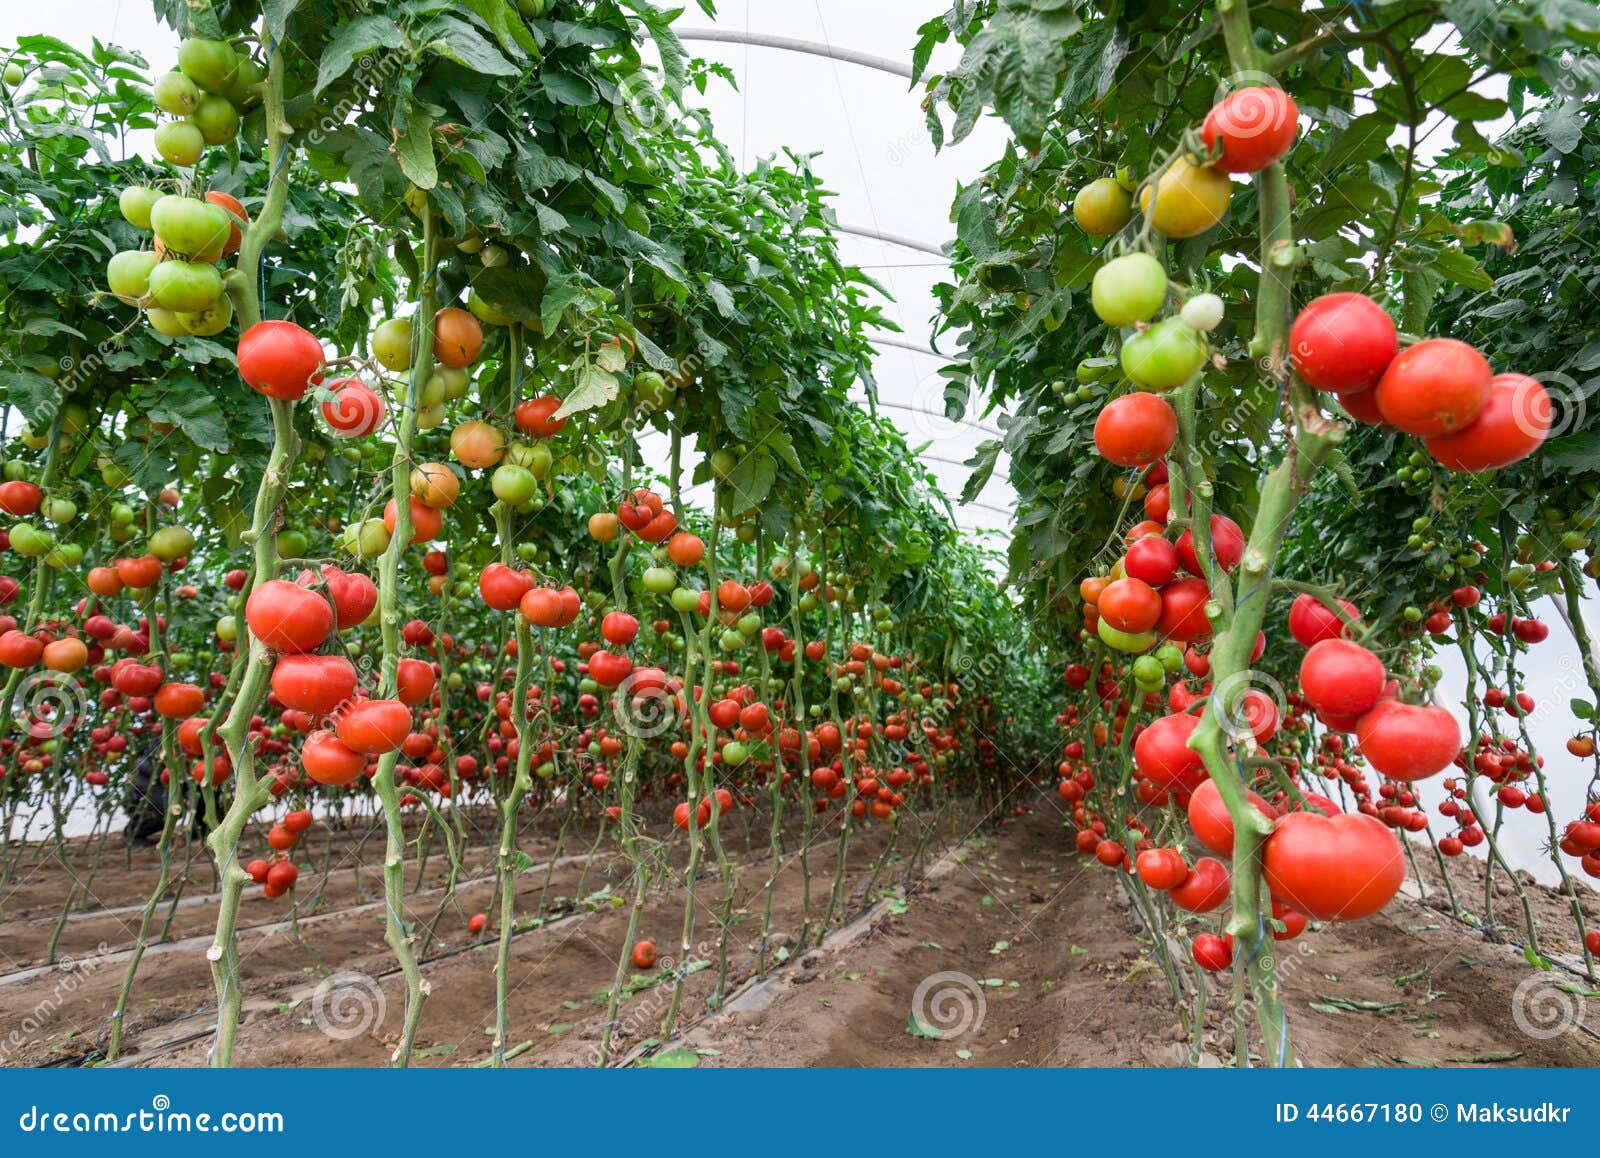 tomatoes in a greenhouse